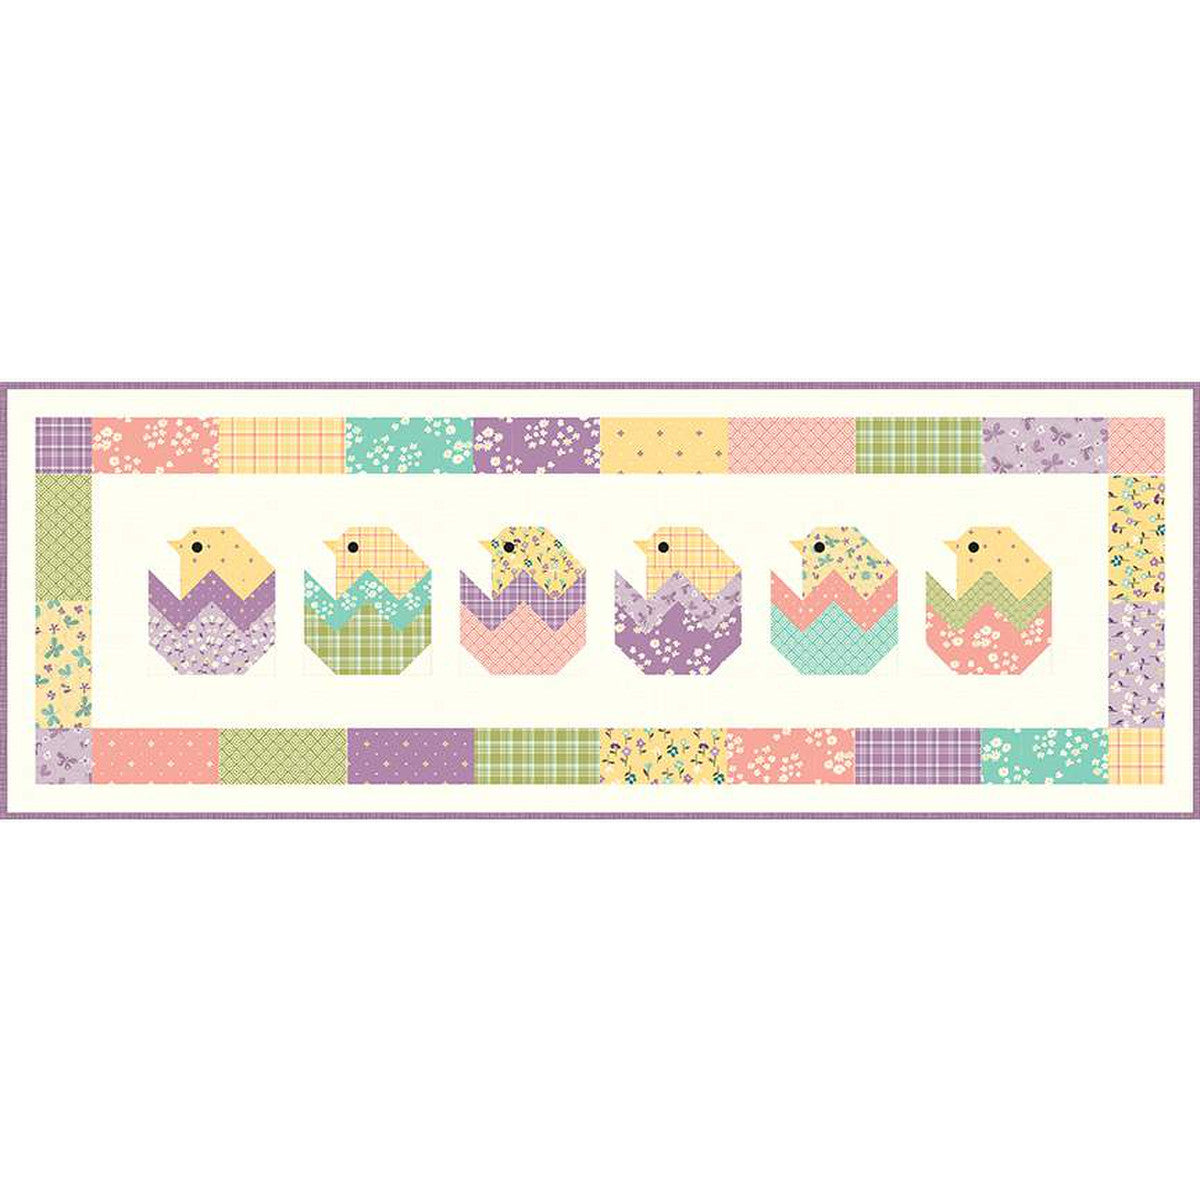 The Peeps Table Runner pattern by Sandy Gervais of Pieces from My Heart features is 5-inch stacker friendly and features pieced chicks hatching from their shells. Finished size is 15" x 42".